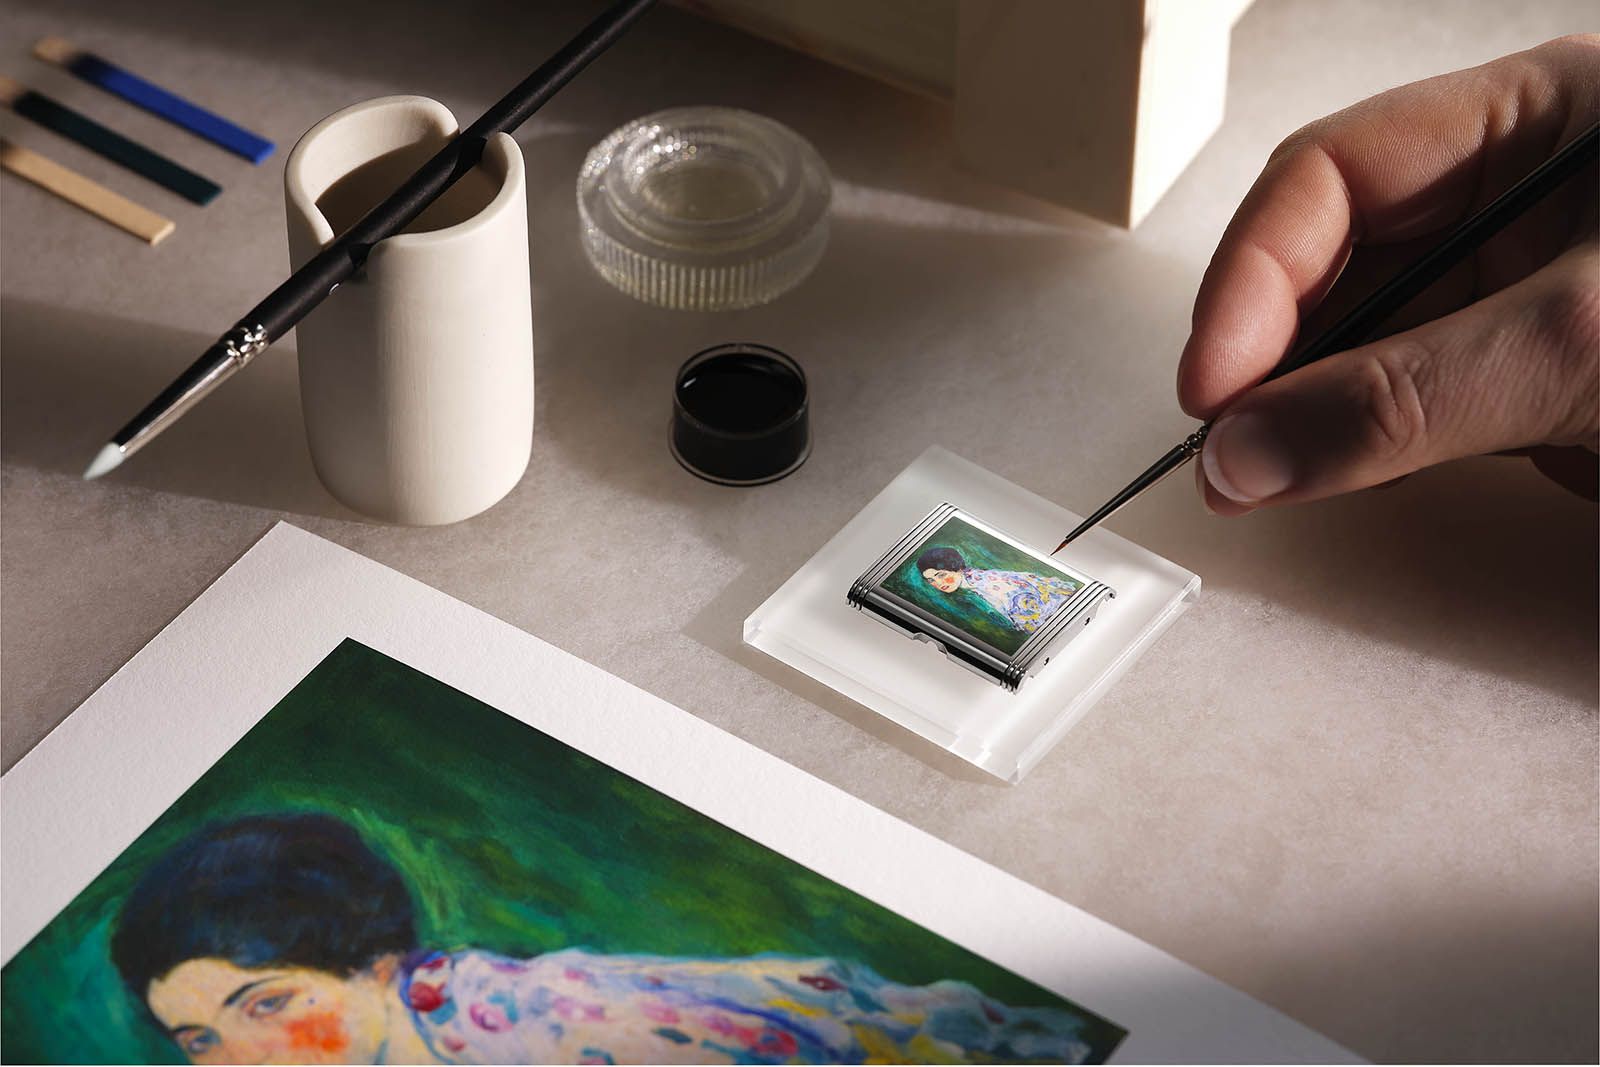 Jaeger-LeCoultre’s master enamellers carefully recreated Gustav Klimt’s ‘Portrait of a Lady’ to create this Reverso Tribute Enamel Hidden Treasures watch